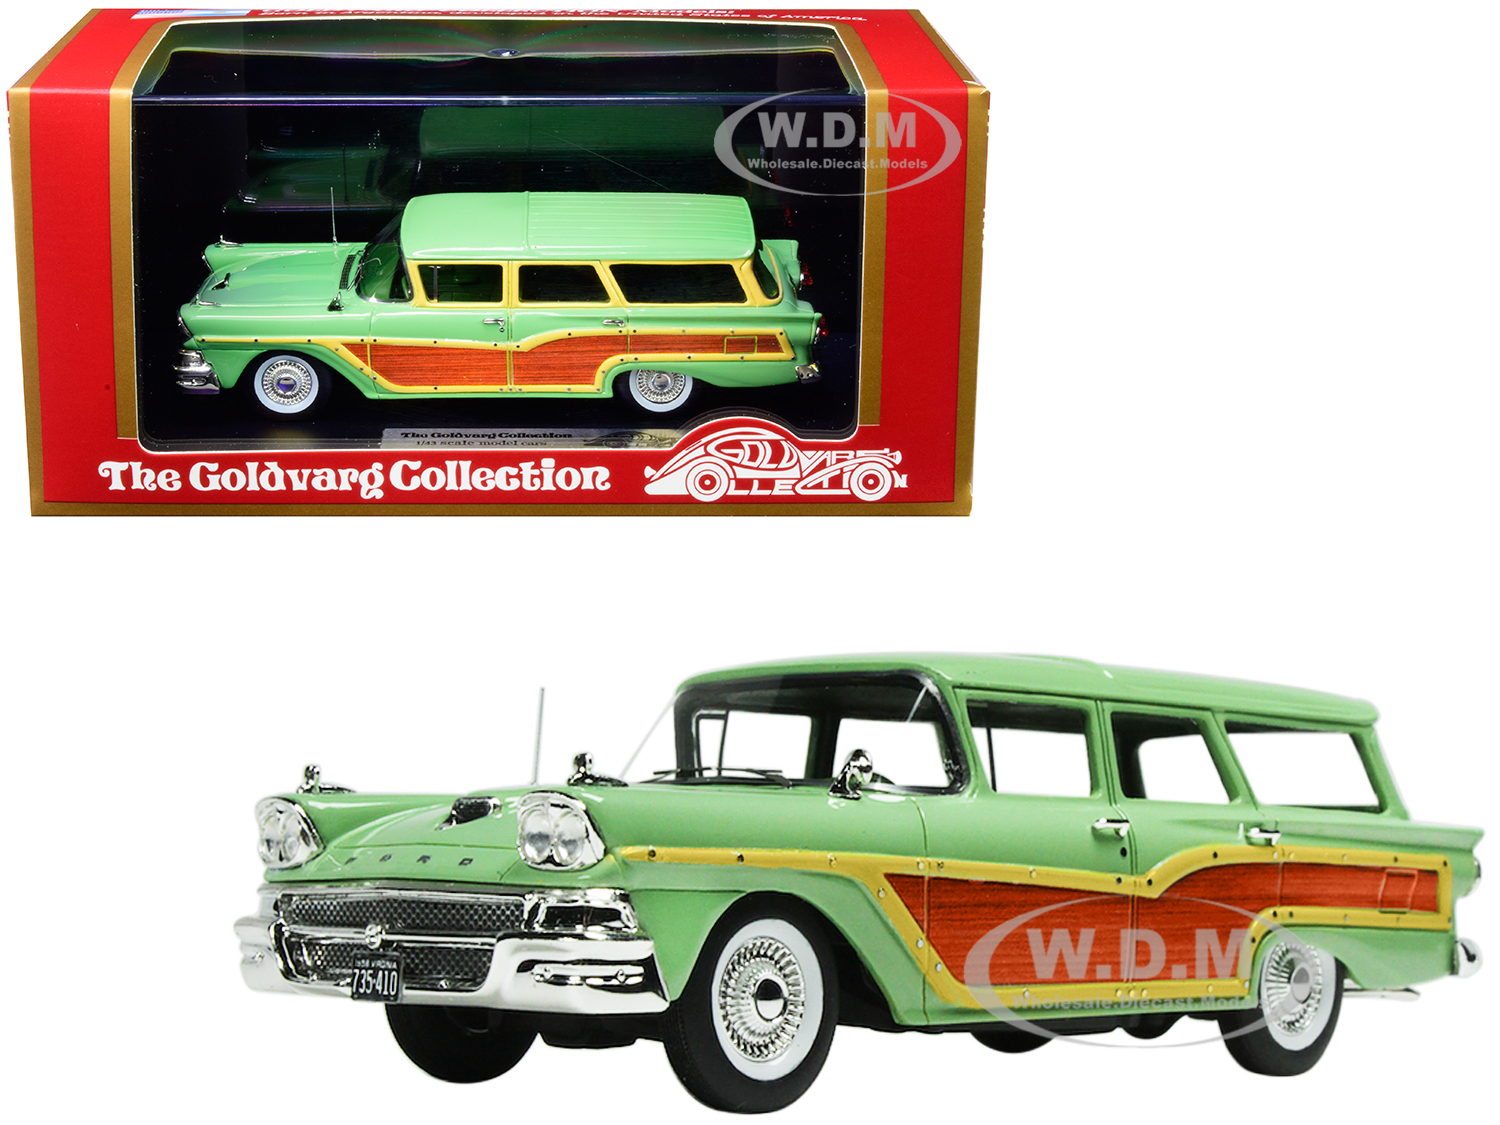 1958 Ford Country Squire Seaspray Green With Woodgrain Panels And "vote For Kennedy" Bumper Sticker Limited Edition To 235 Pieces Worldwide 1/43 Mode